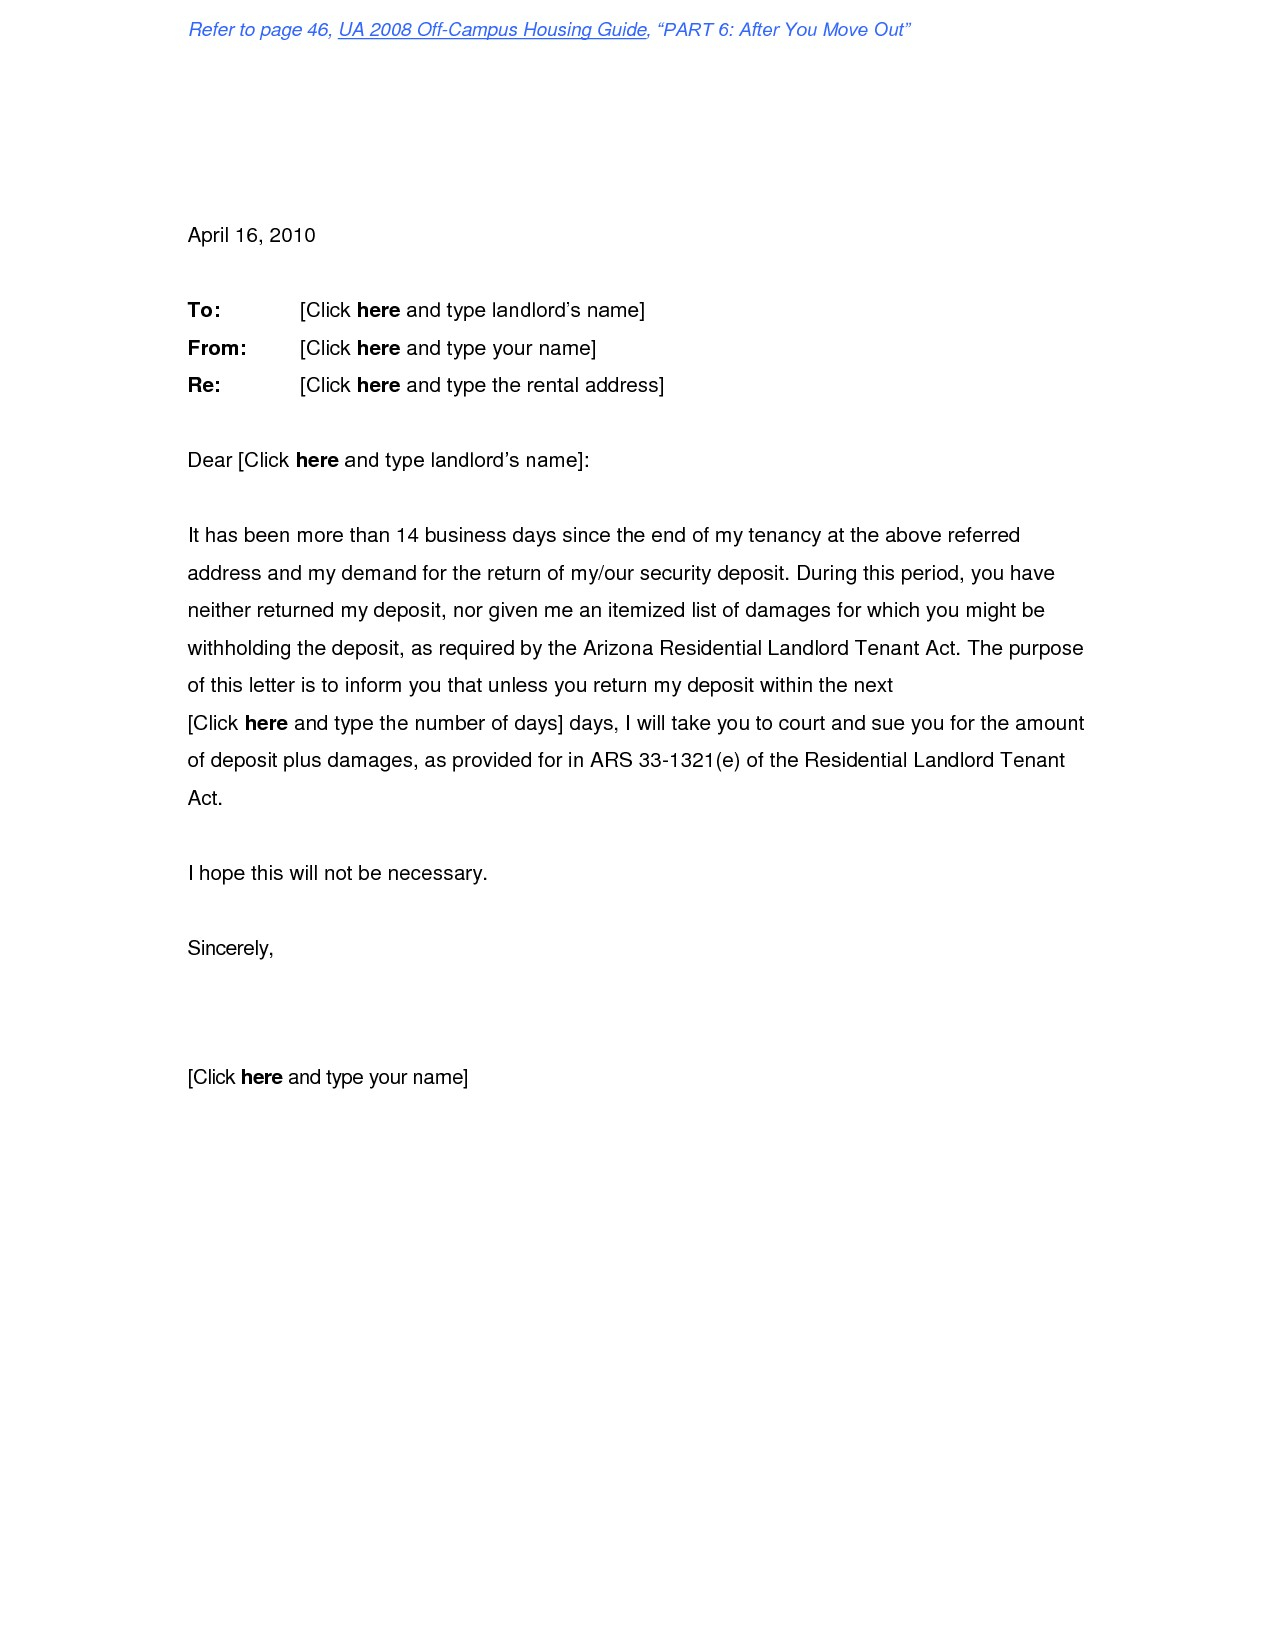 Security Deposit Refund Letter Template - Refund Receipt Template Security Deposit form Letter Re Security